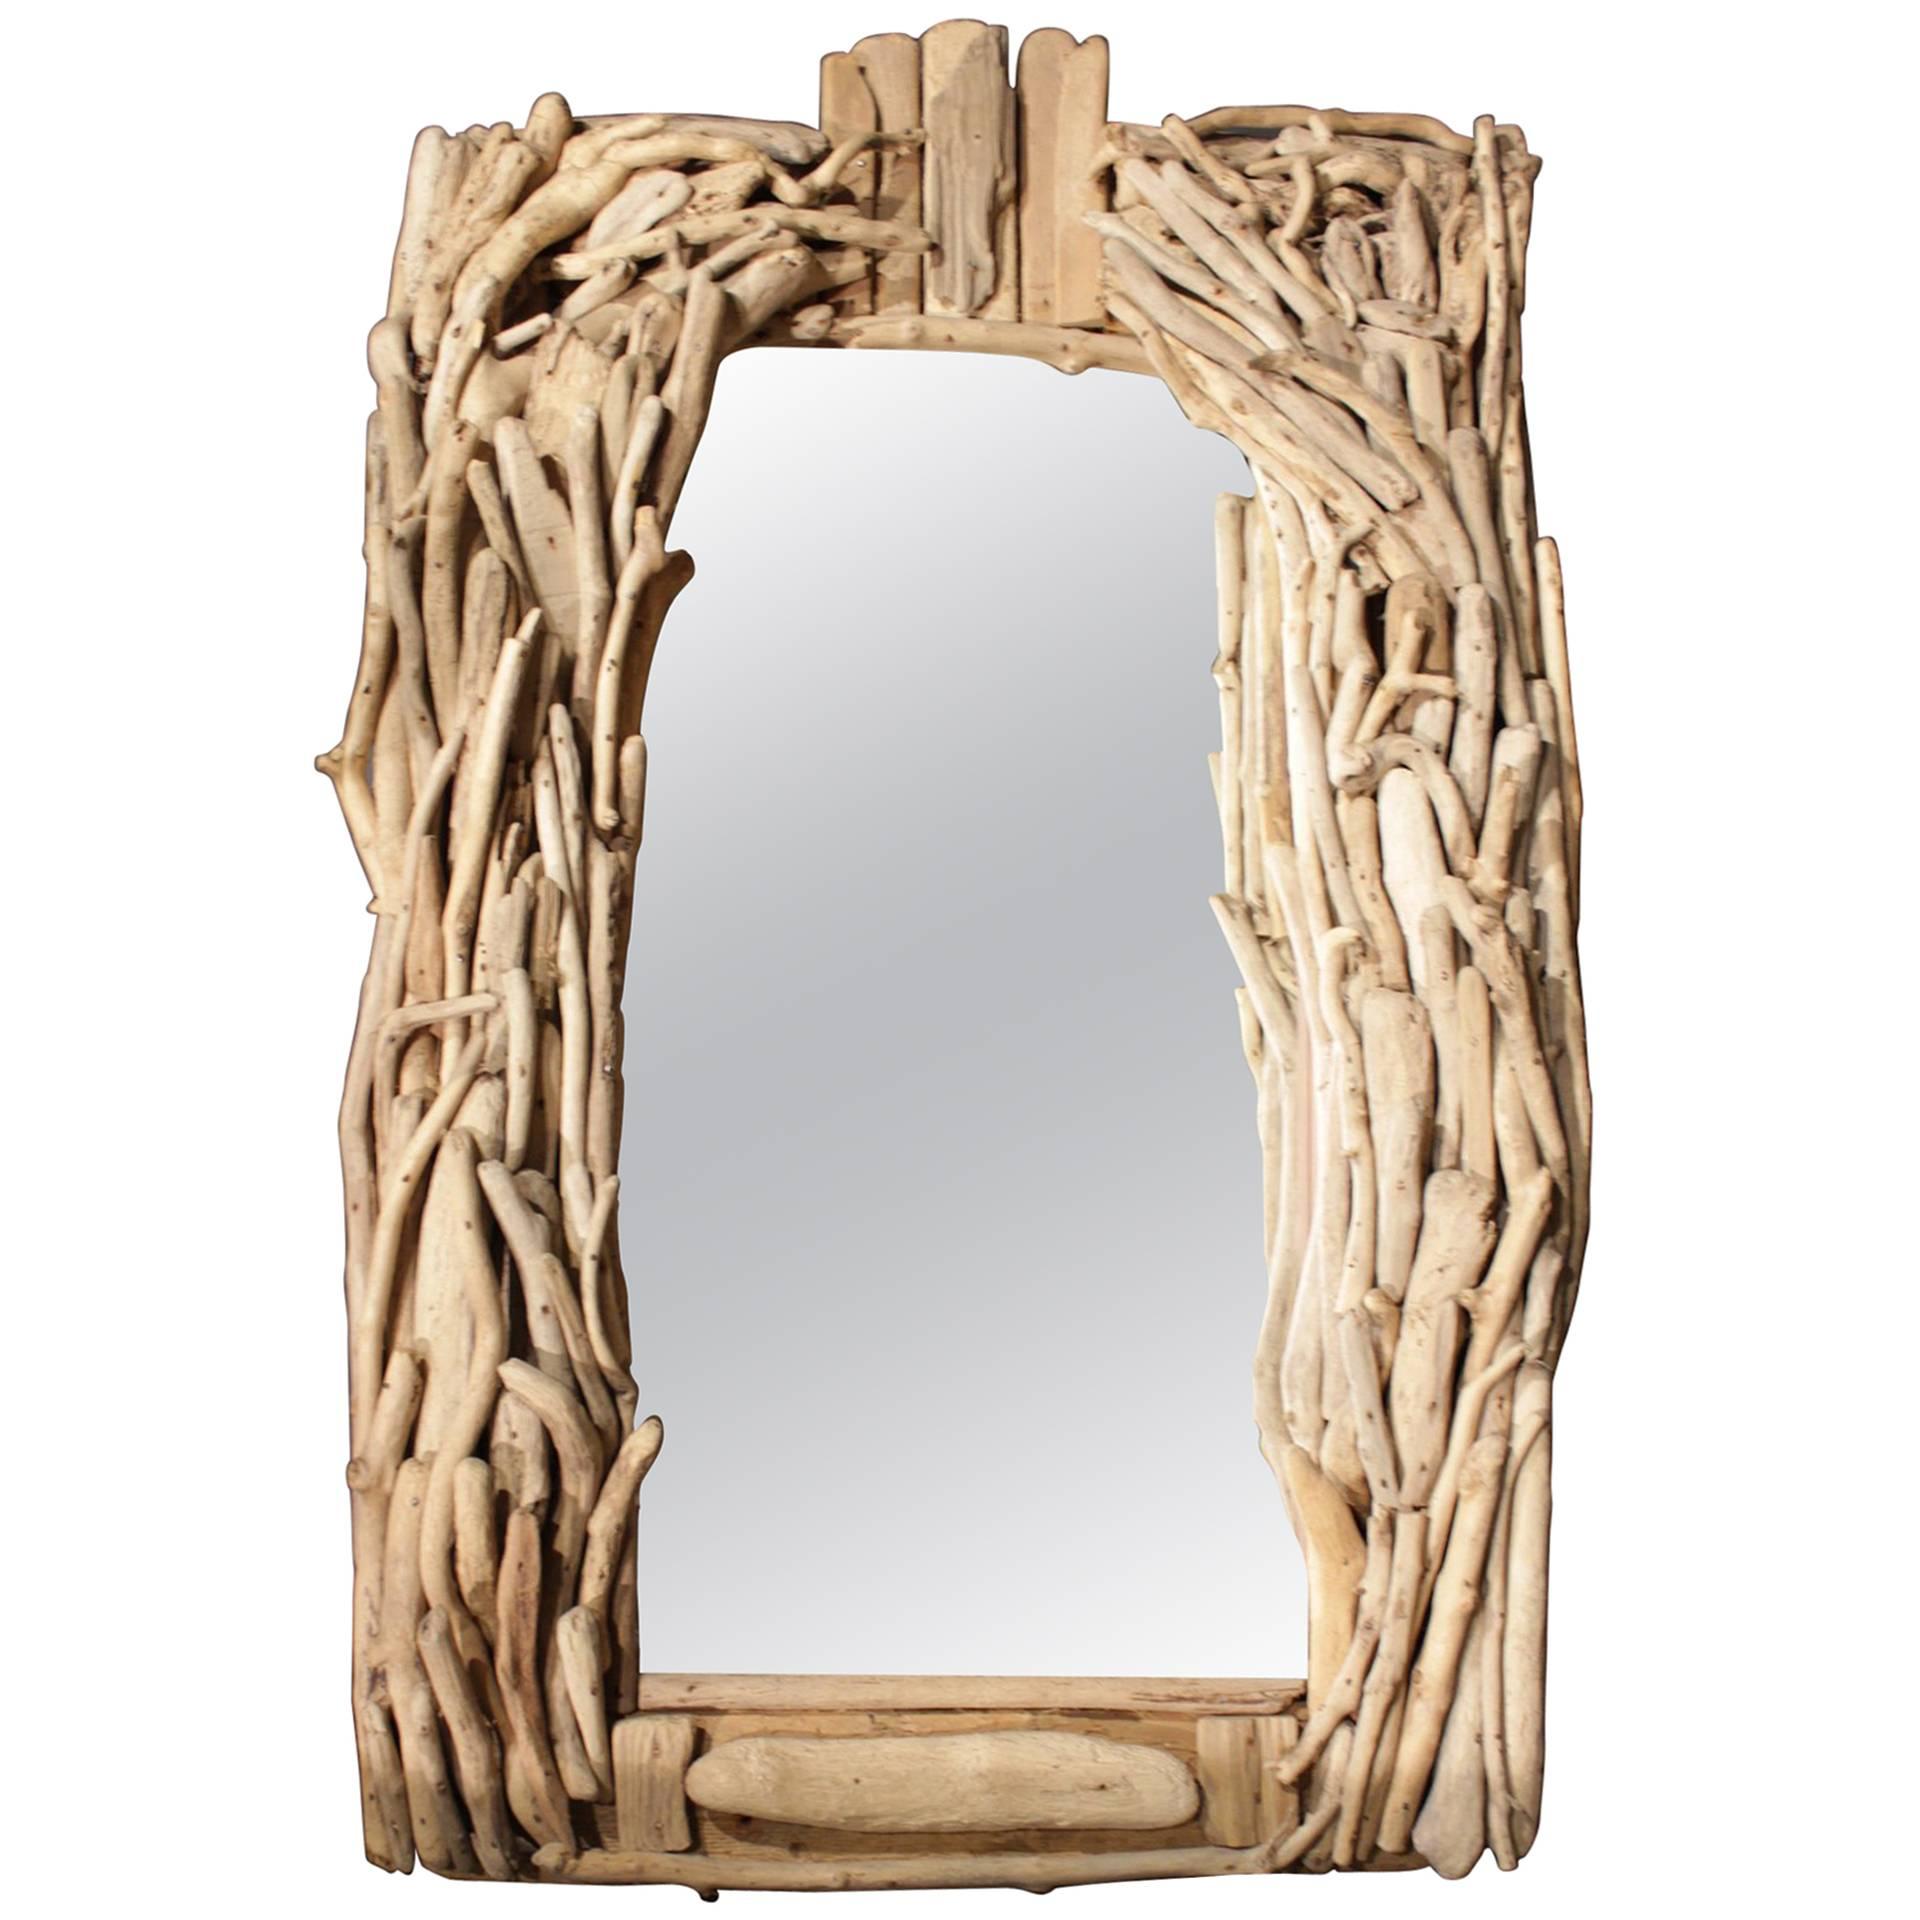 Driftwood Mirror For Sale